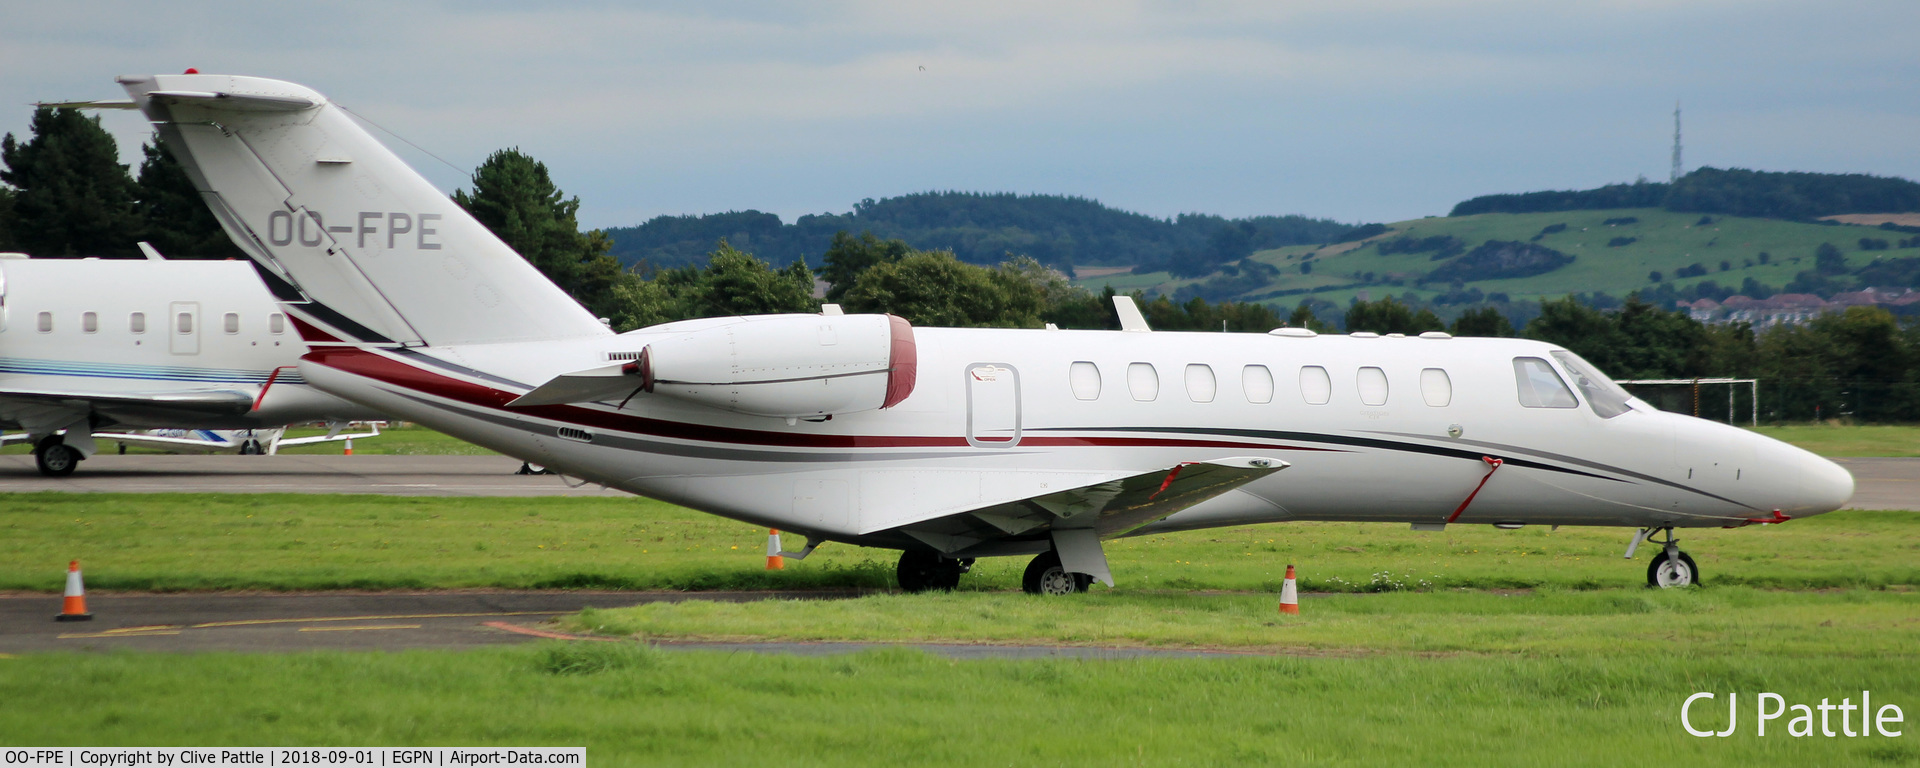 OO-FPE, 2007 Cessna 525B CitationJet CJ3 C/N 525B-0158, Parked at Dundee